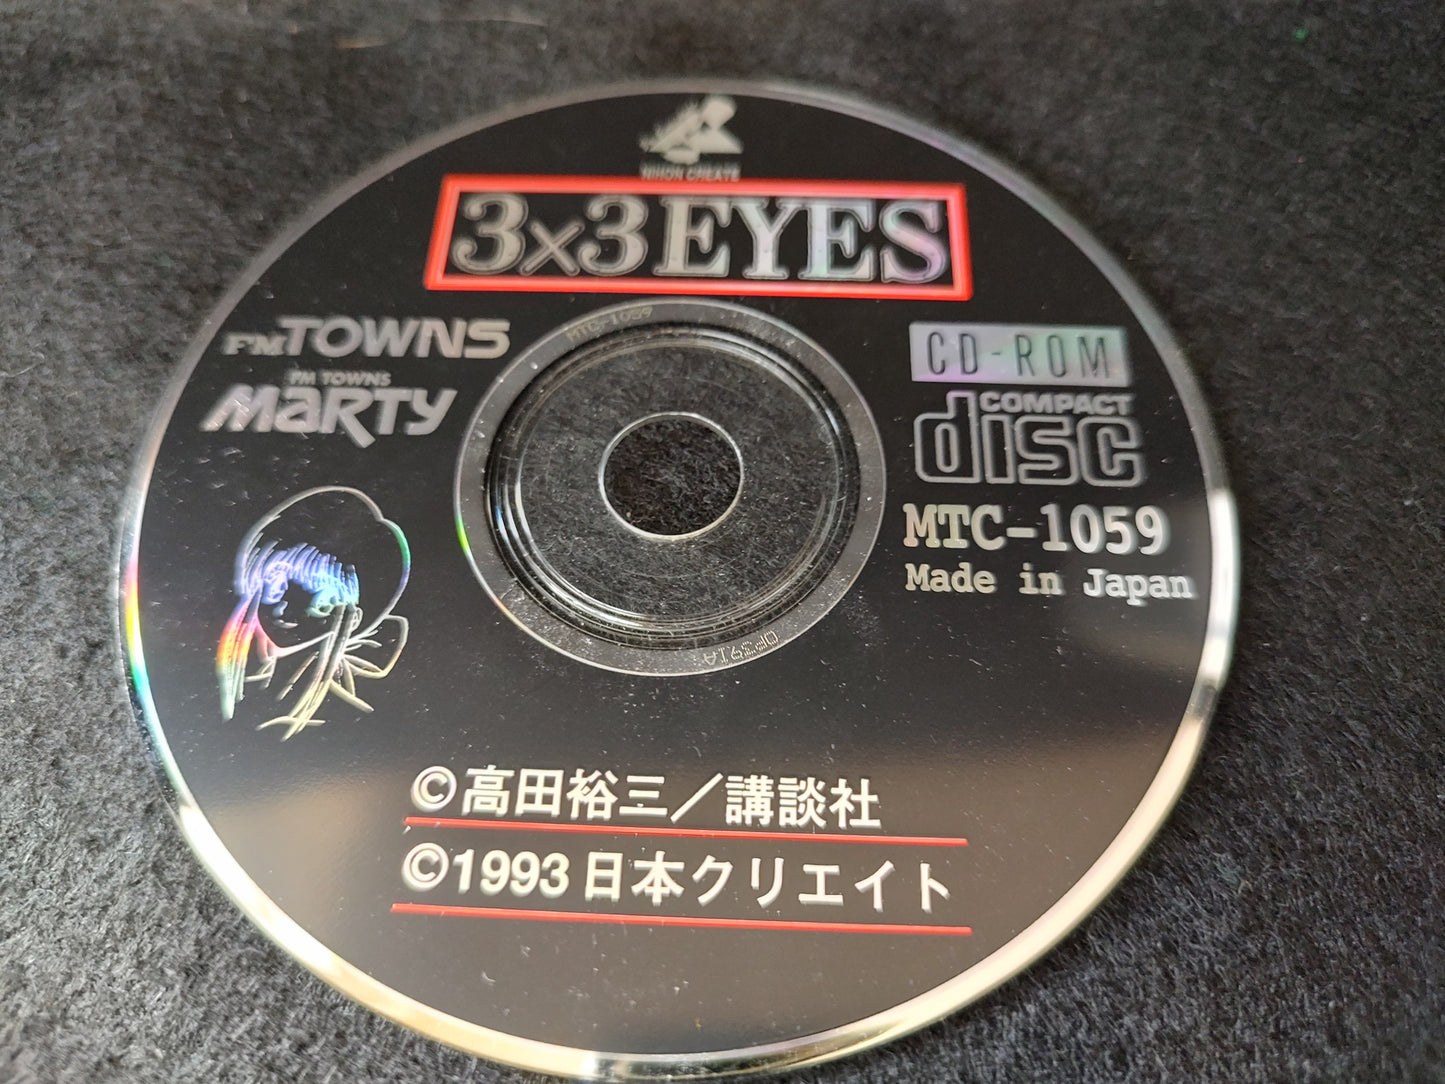 3×3 EYES FM TOWNS Marty Game, Disk, w/Manual and Box set, Working-f0706-